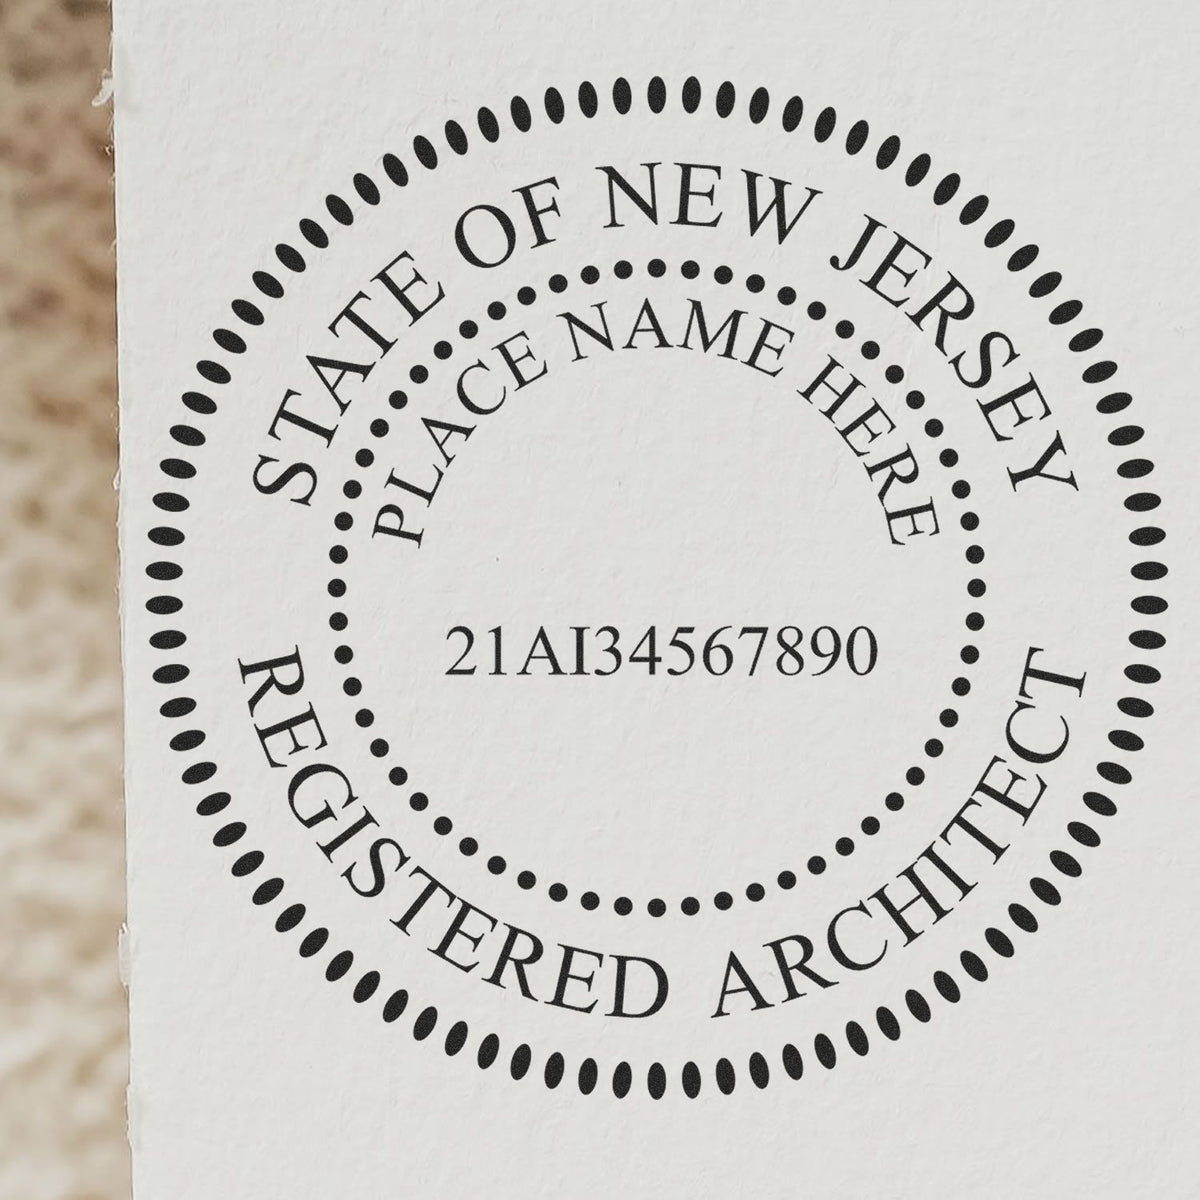 Slim Pre-Inked New Jersey Architect Seal Stamp in use photo showing a stamped imprint of the Slim Pre-Inked New Jersey Architect Seal Stamp